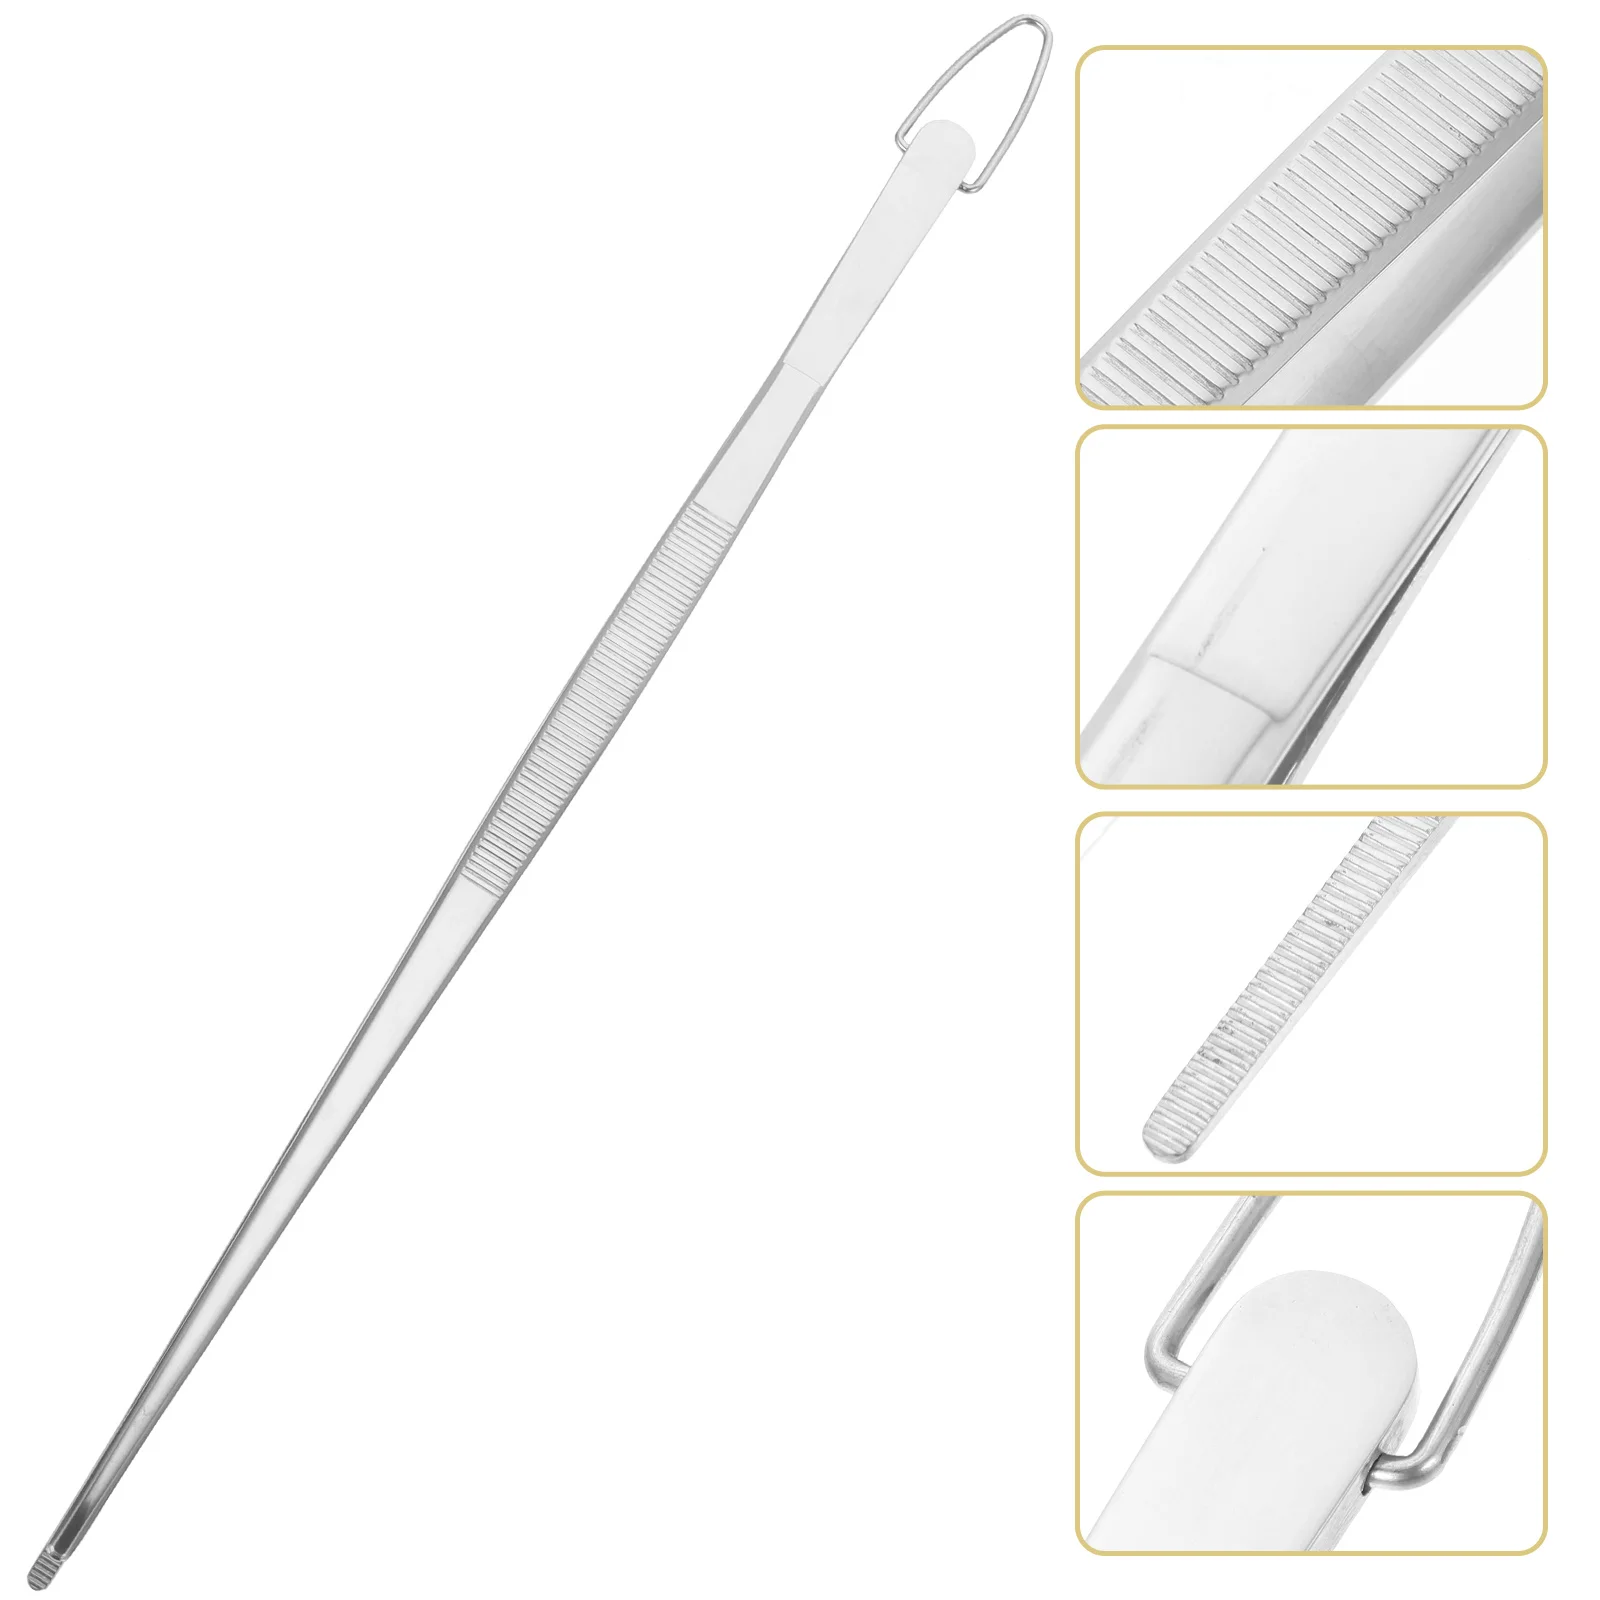 

Stainless Steel Tweezers Bbq Kits Food Tong Cooking Western Fine Restaurant Reusable Kitchen Supplies Picking Tongs Alligator